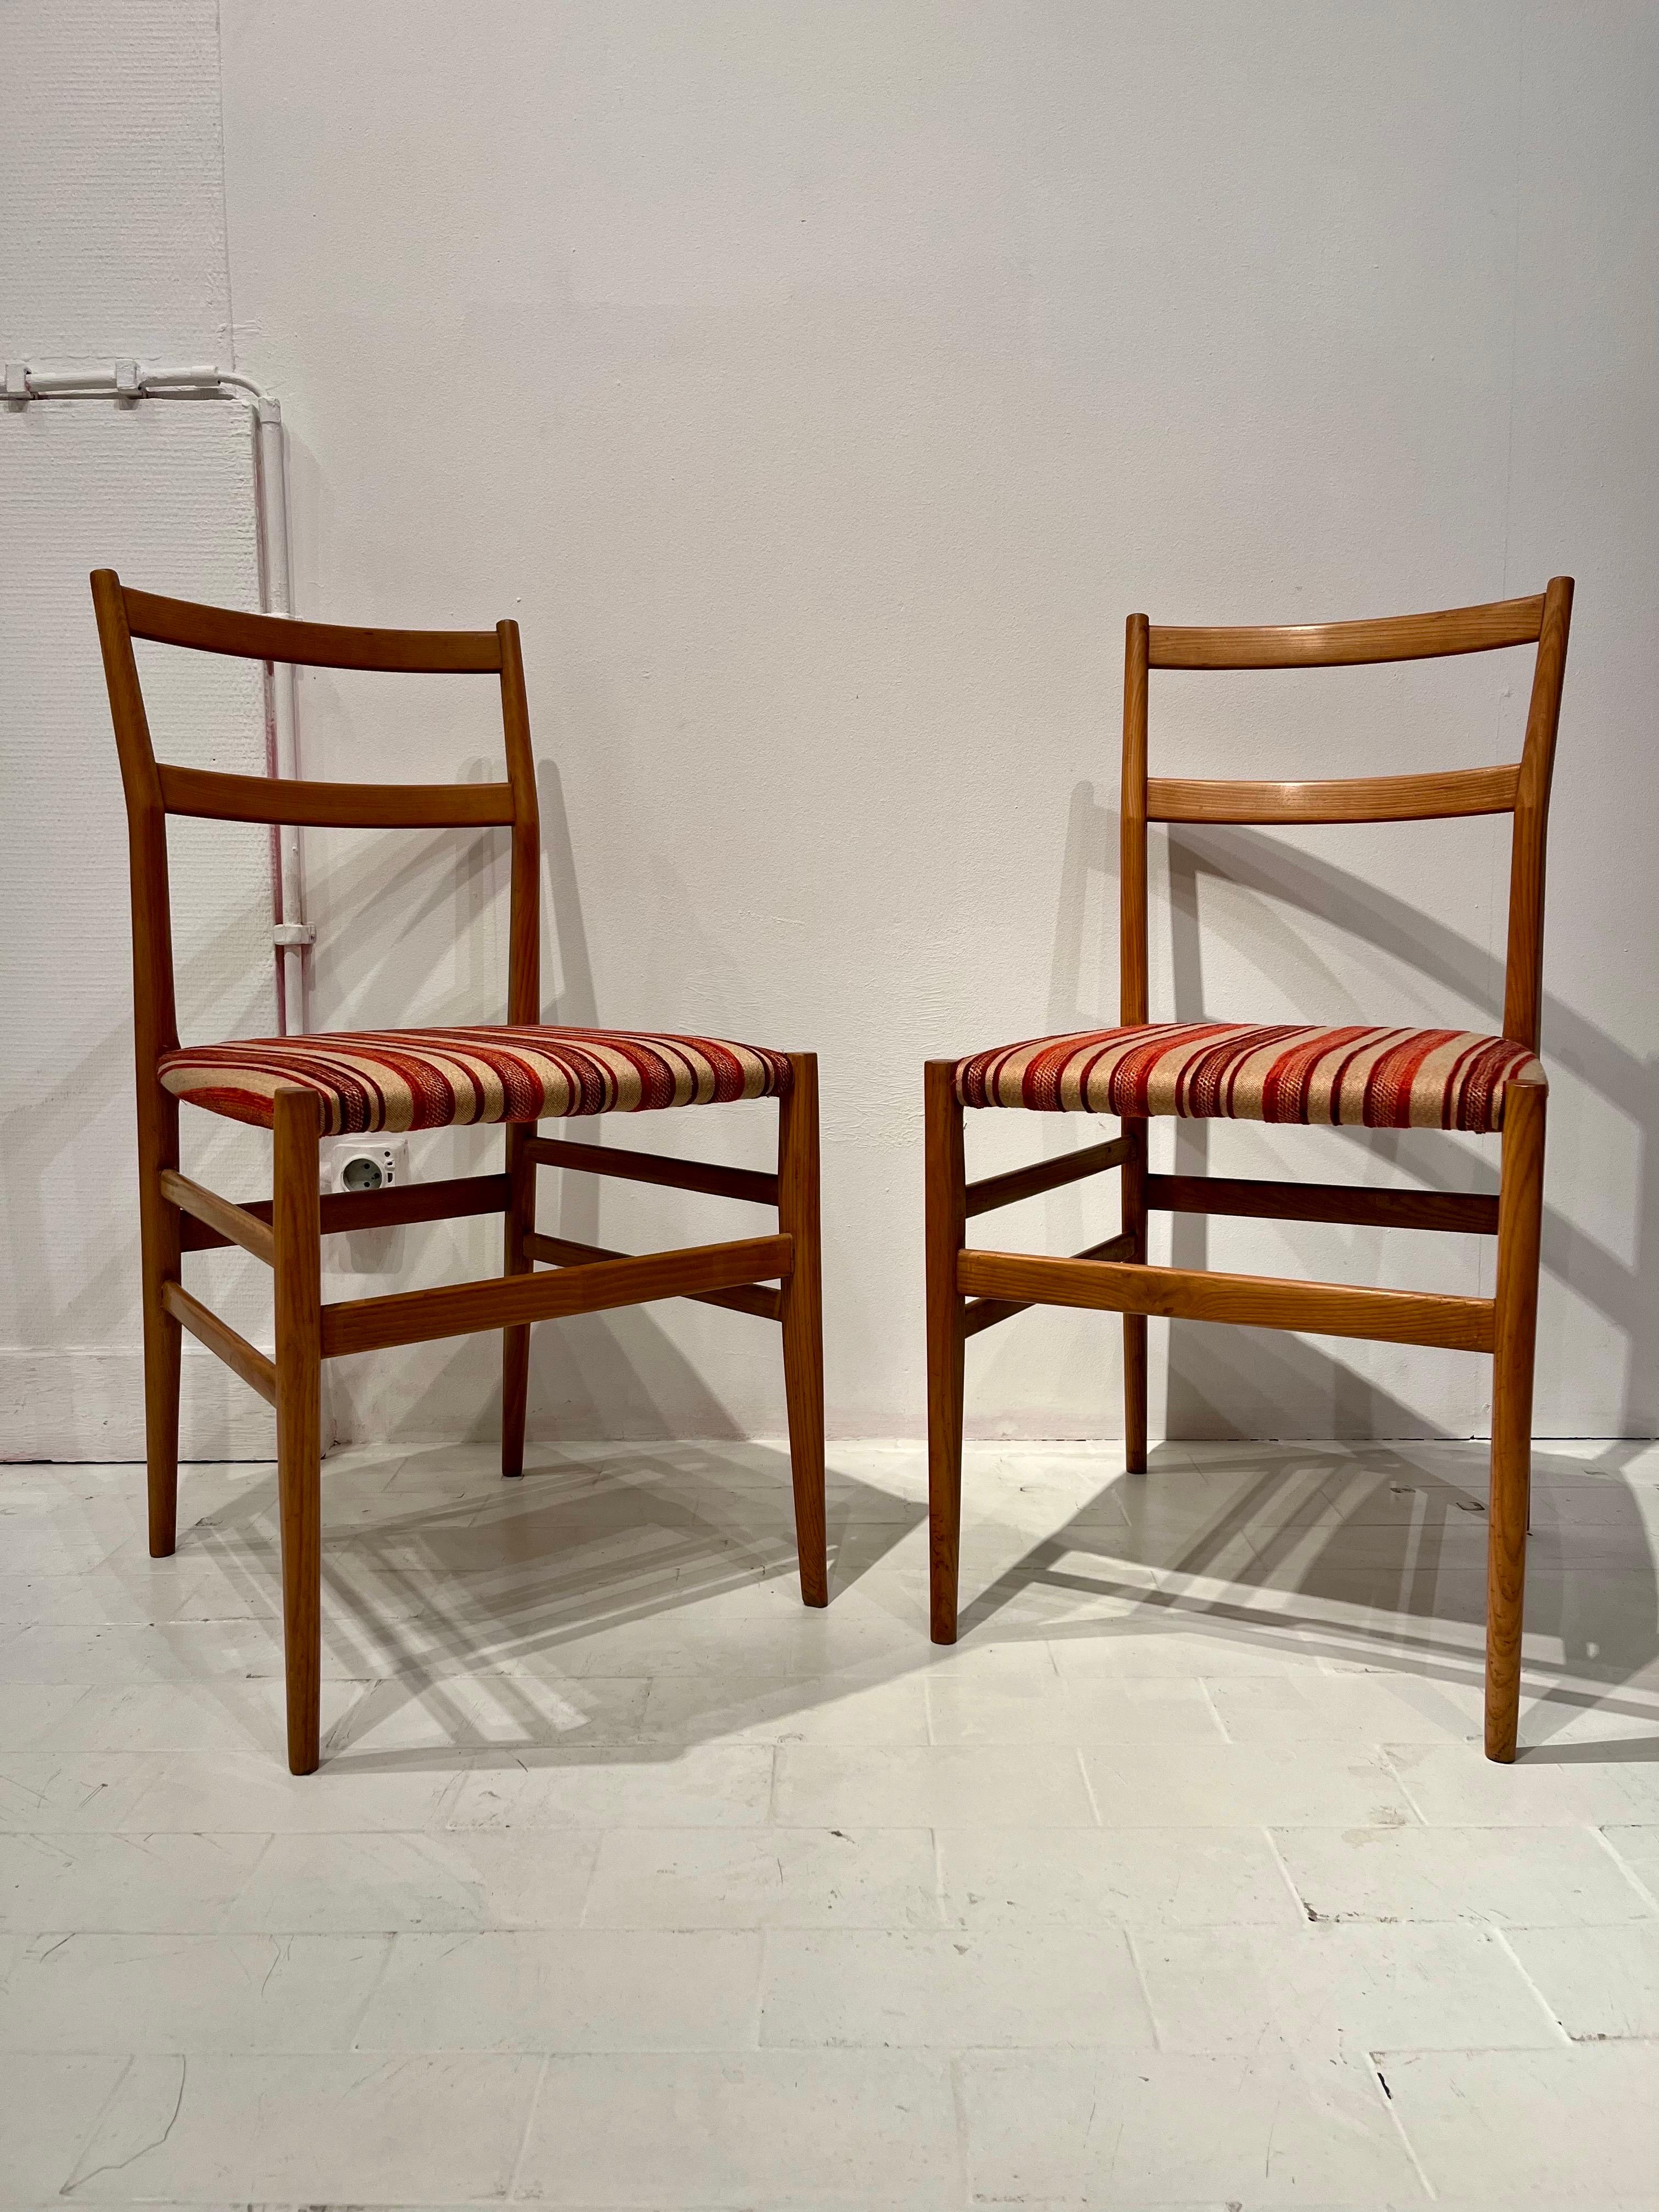 Pair of Gio Ponti Leggera Chairs, 1954 In Good Condition For Sale In Brussels, BE